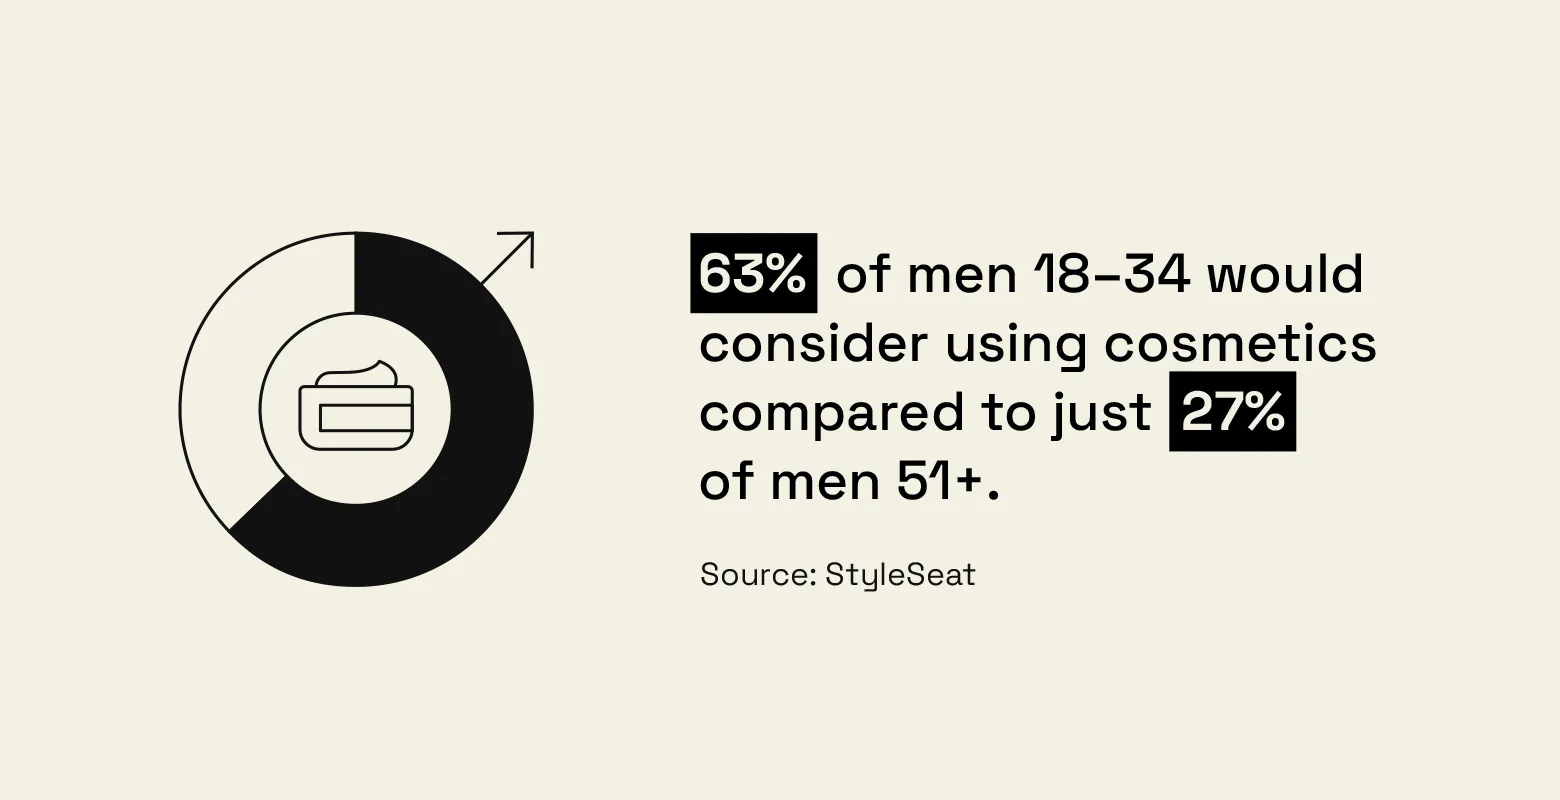 63% of males 18-34 would consider using cosmetics
compared to just 27% of men 51+.